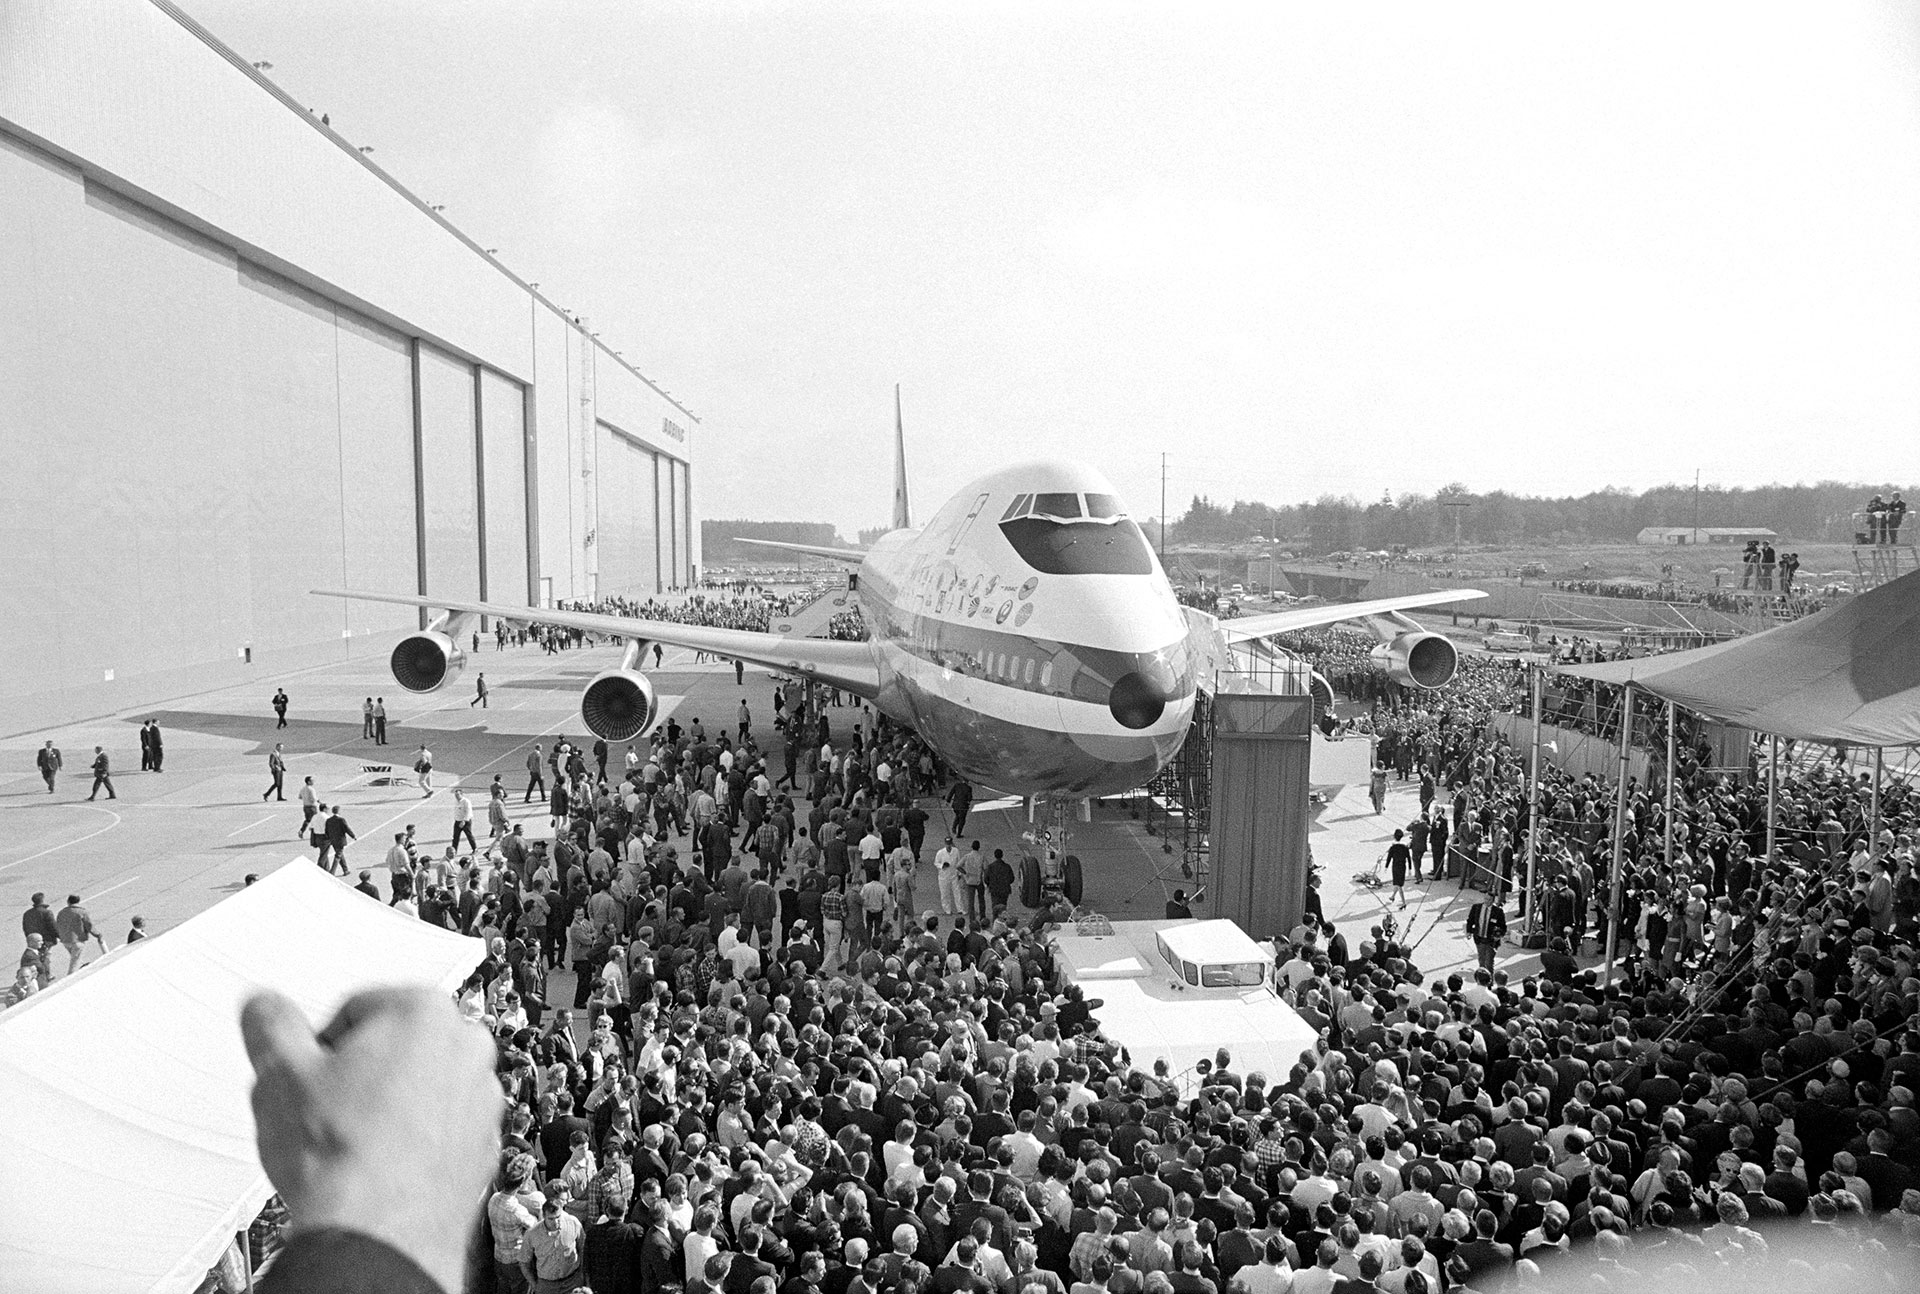 The Boeing 747, the world's largest passenger airliner, was unveiled to the public on September 30, 1969. Seating 490 passengers, this $20 million aircraft was delivered to airlines in October.  The ship weighed 700,000 pounds and had 10 cabin seats (Bettmann)